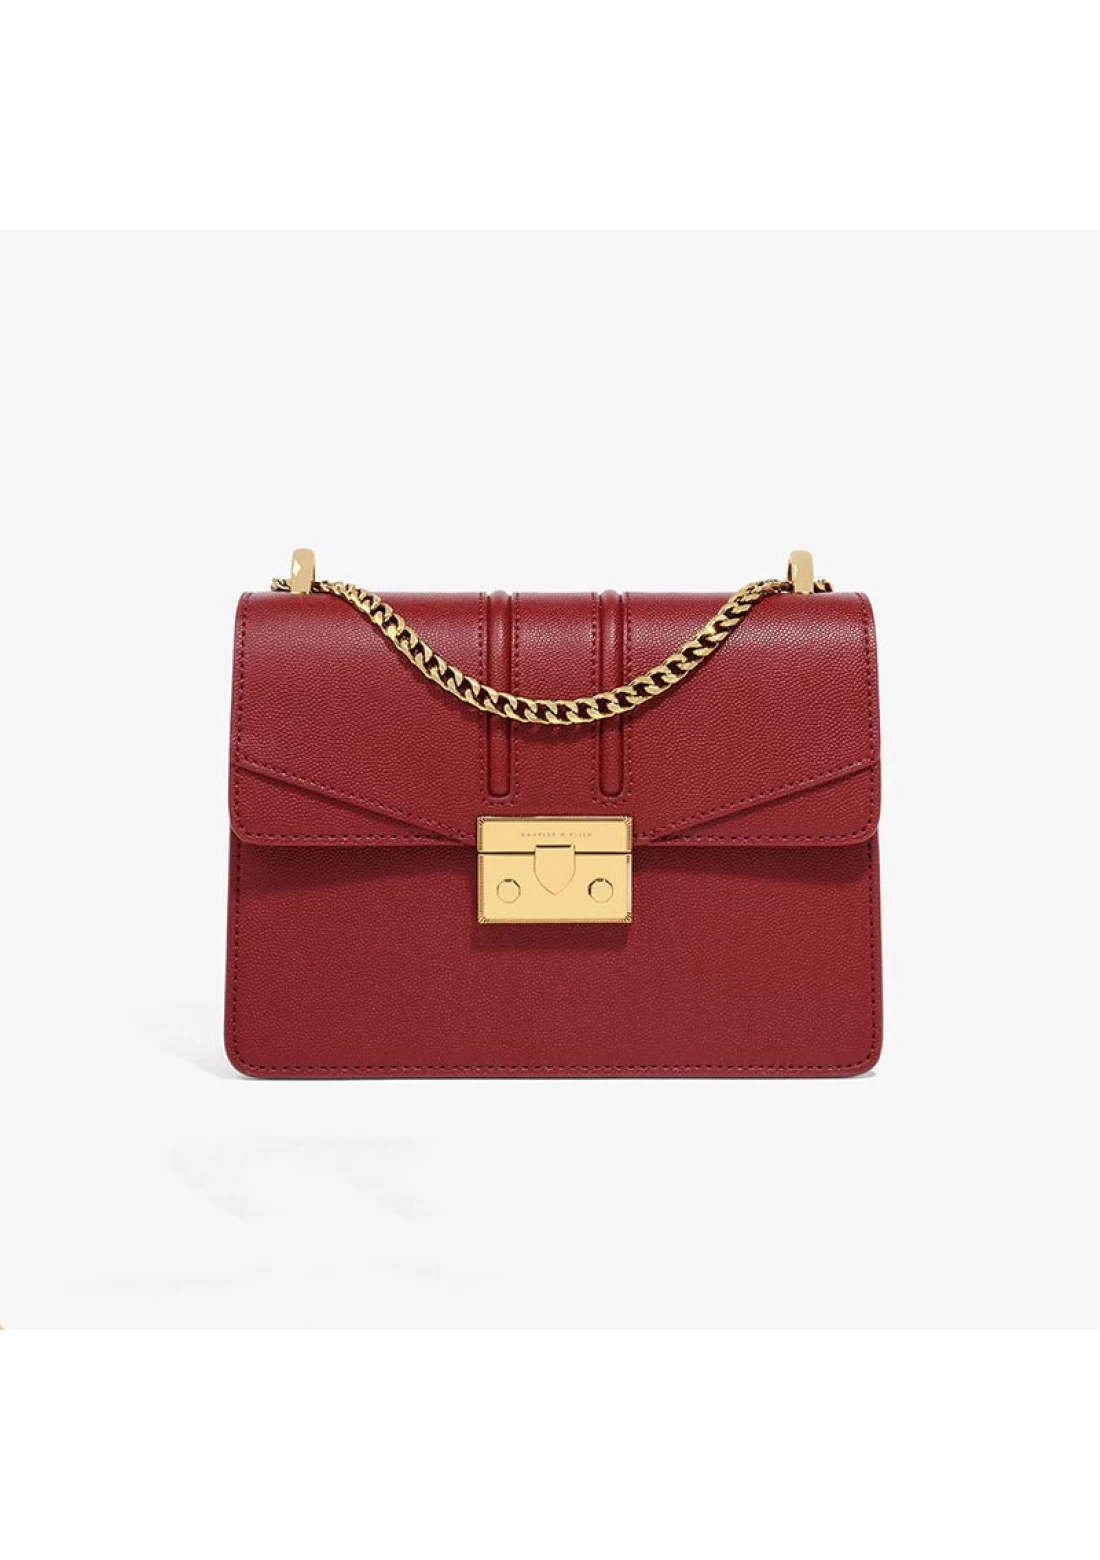 10 Bags Perfect For Any Busy Working Woman